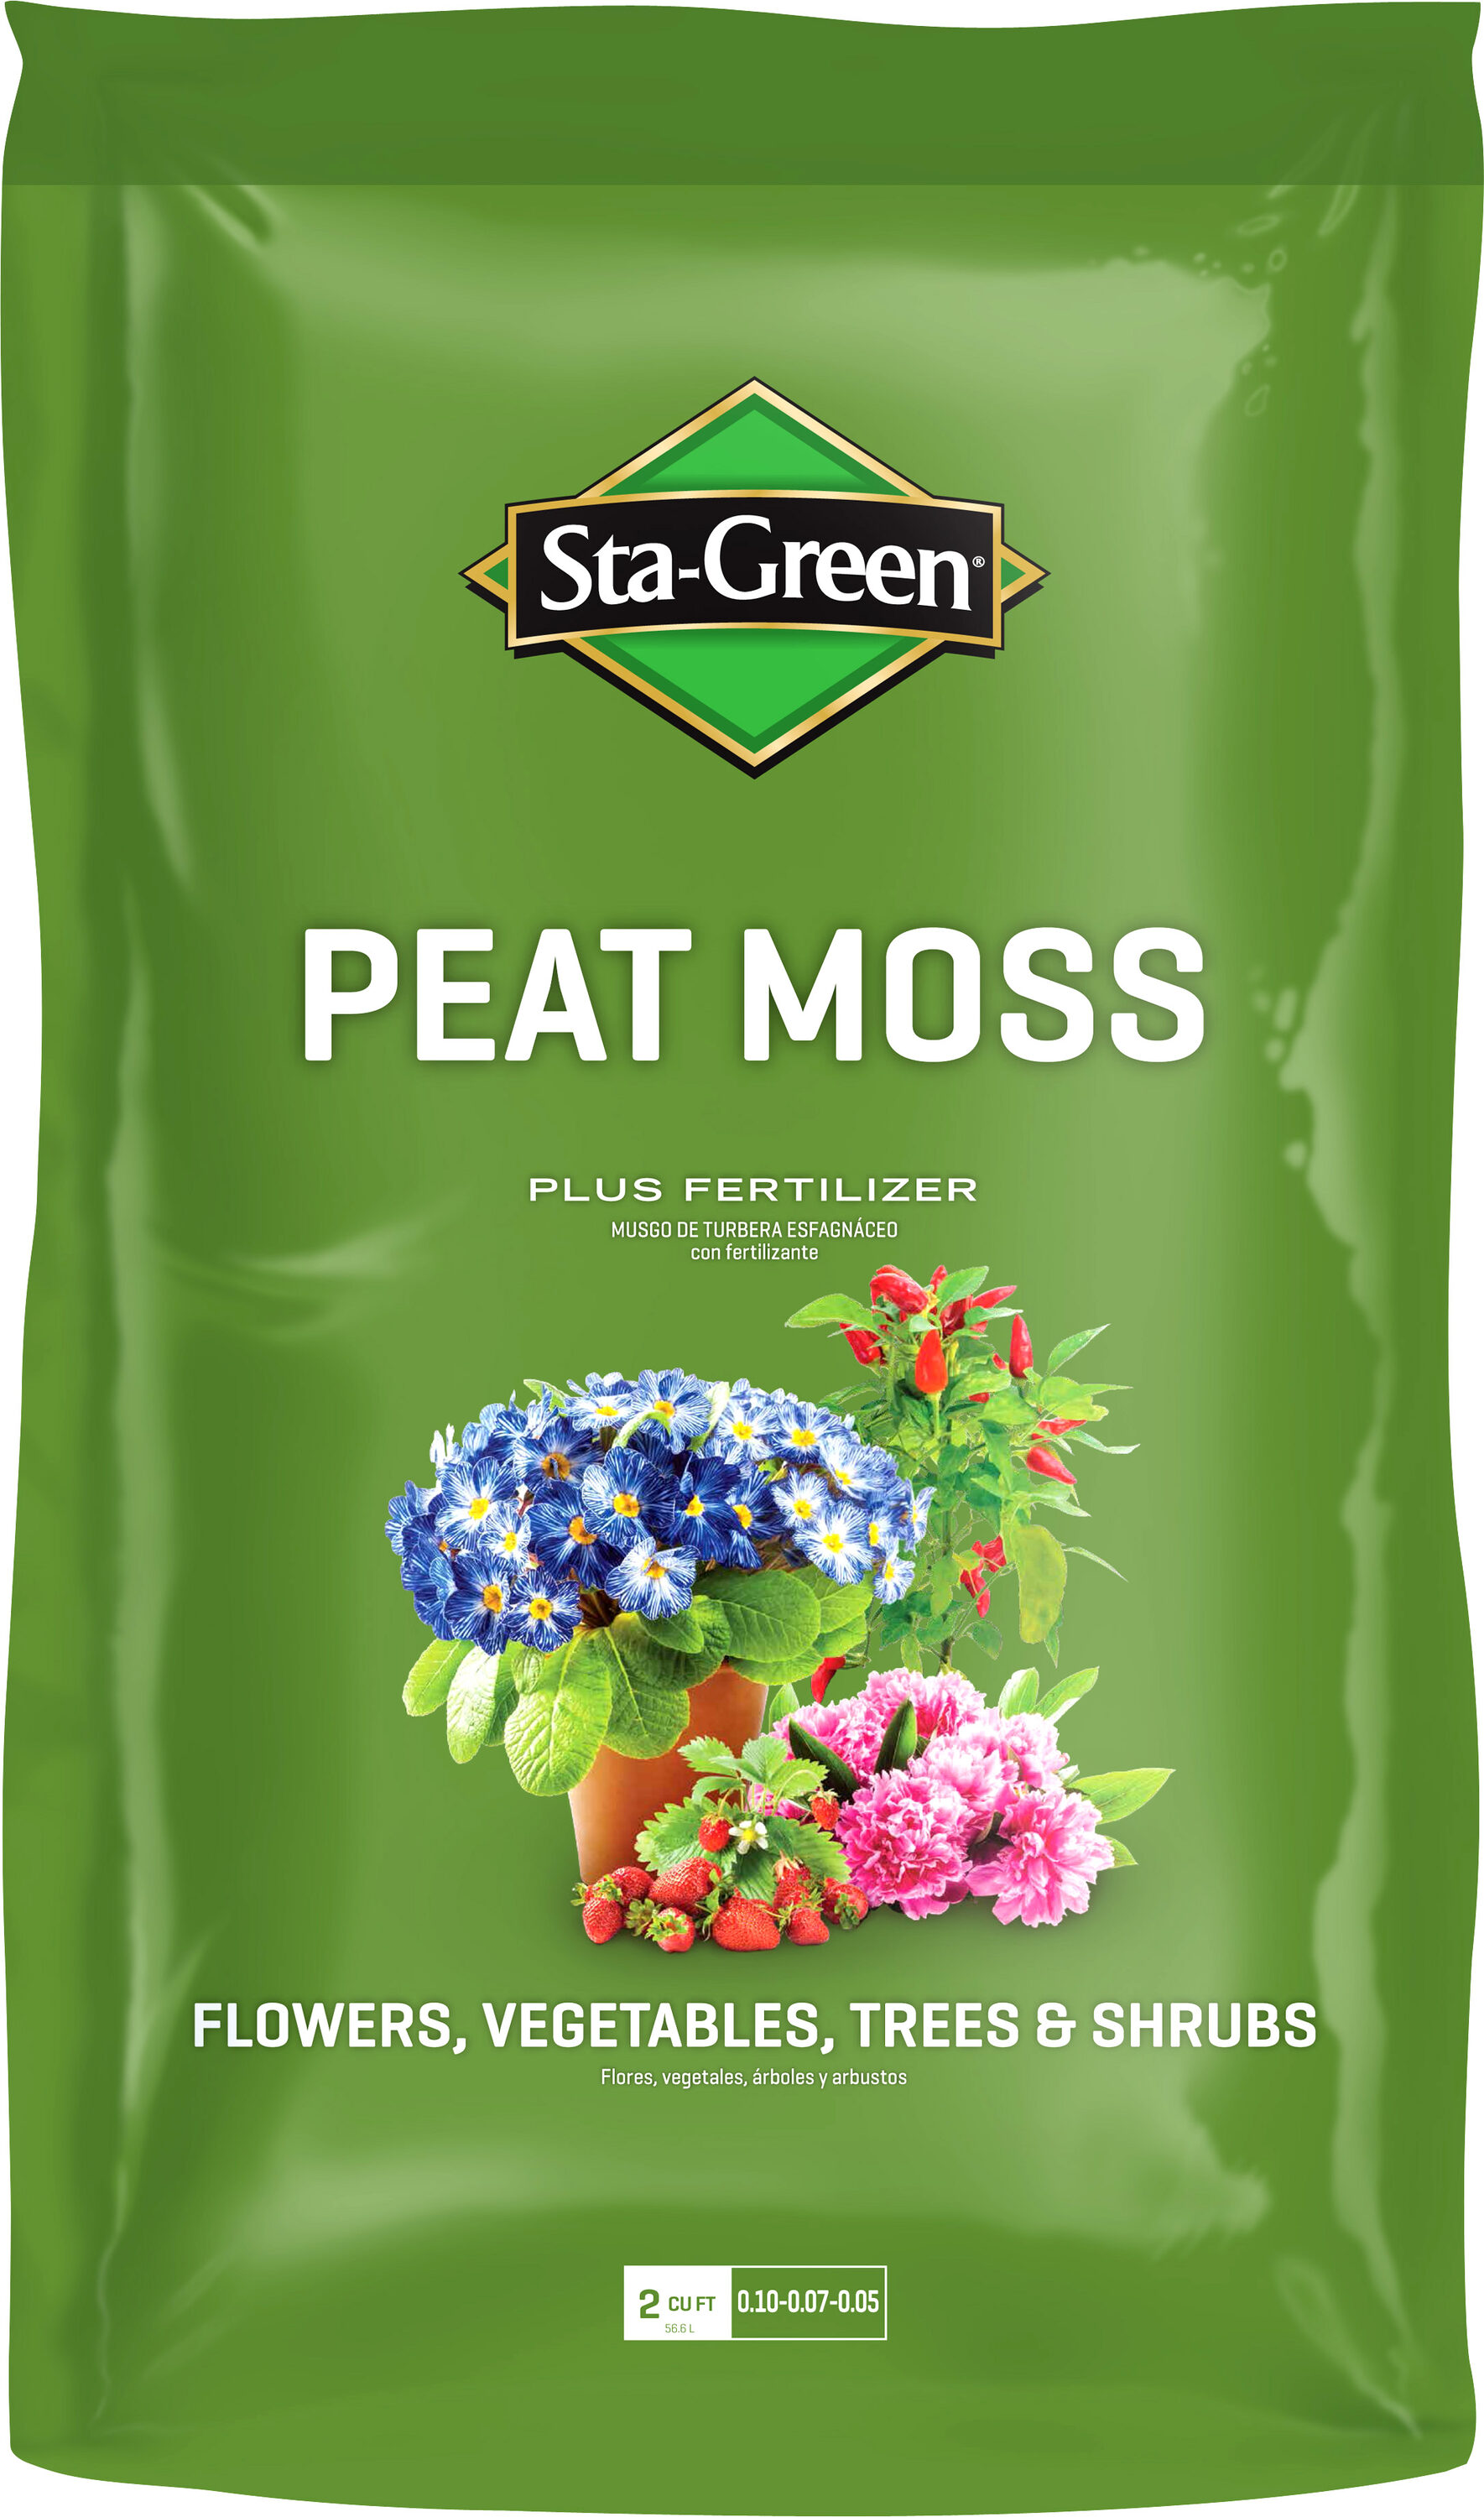 Using Sphagnum Peat Moss Responsibly — Vermont Compost Company